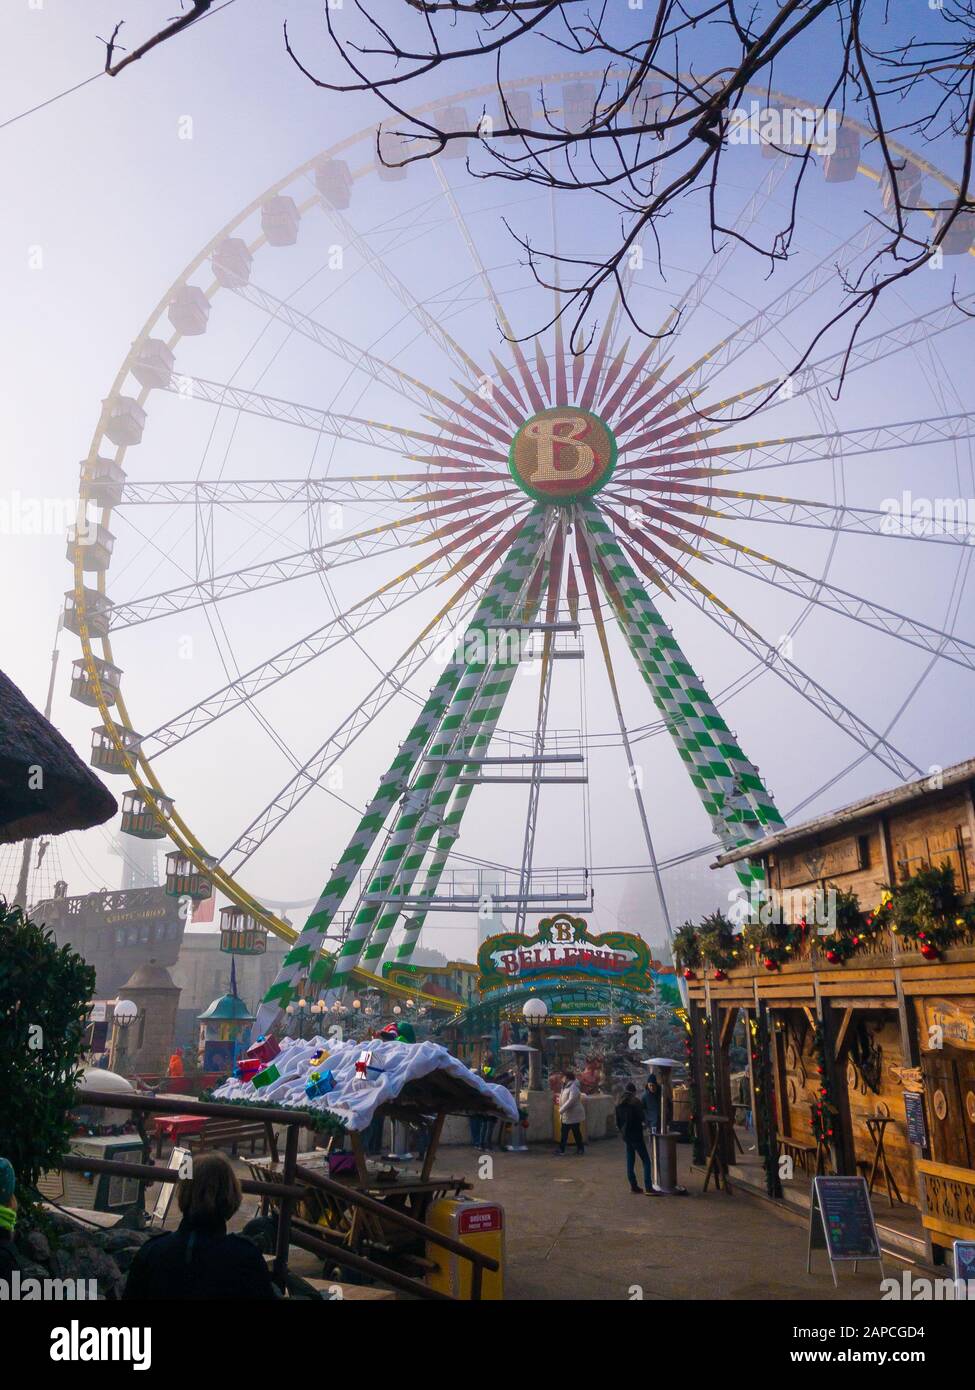 Rust, Germany - 01/06/2020: Big ferris wheel in the theme park 'Europa Park' in the cold winter season with a foggy sky Stock Photo